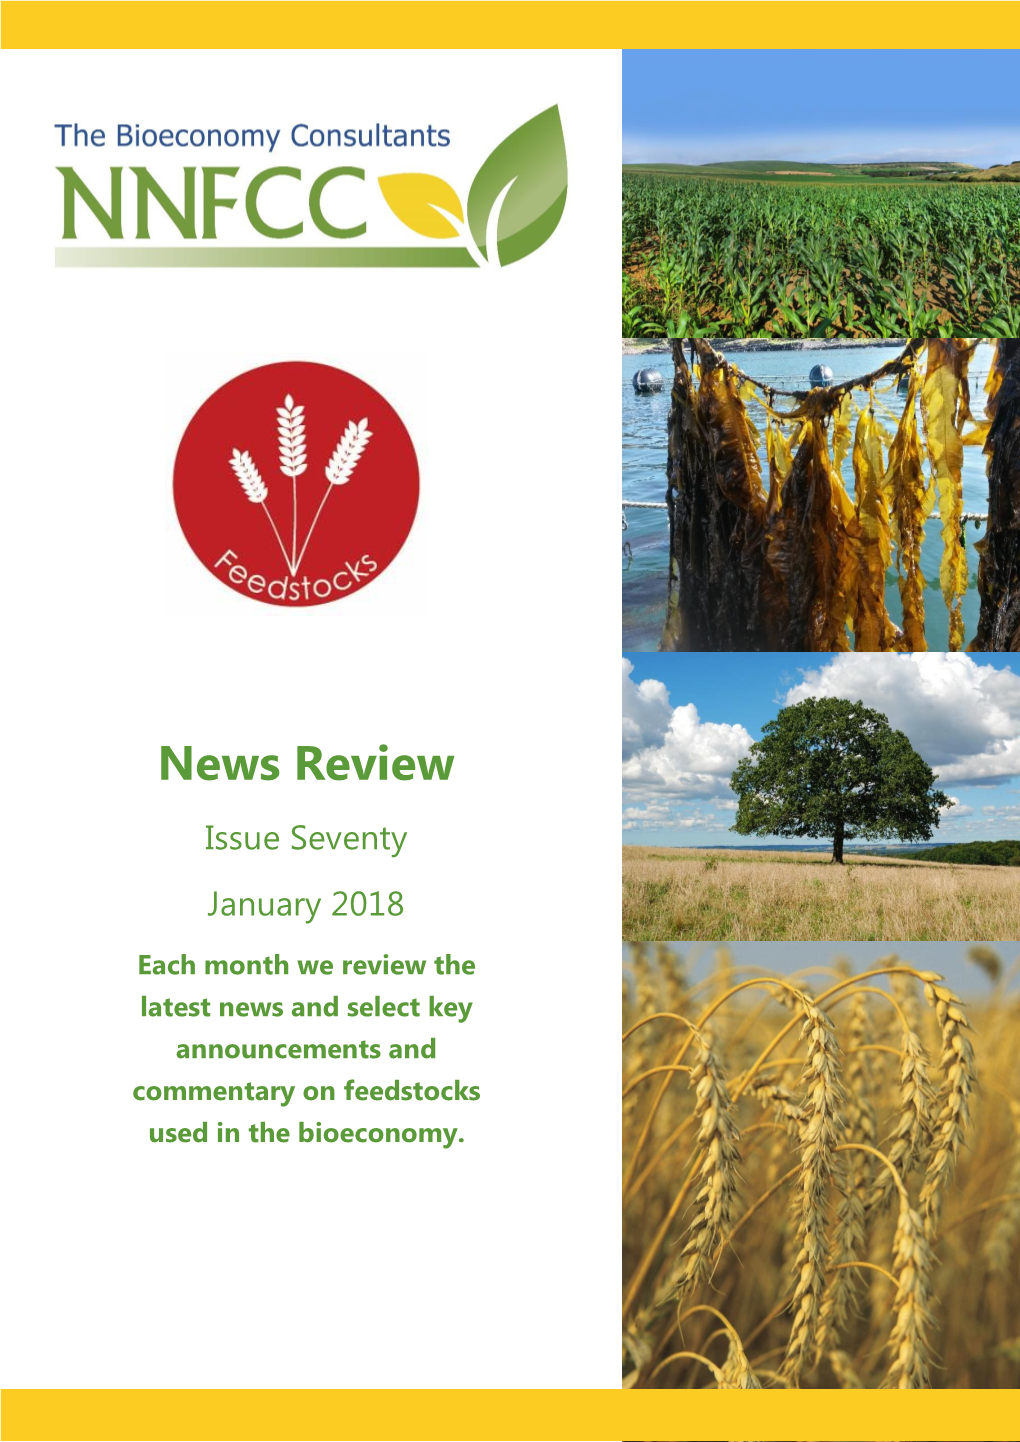 News Review Issue Seventy